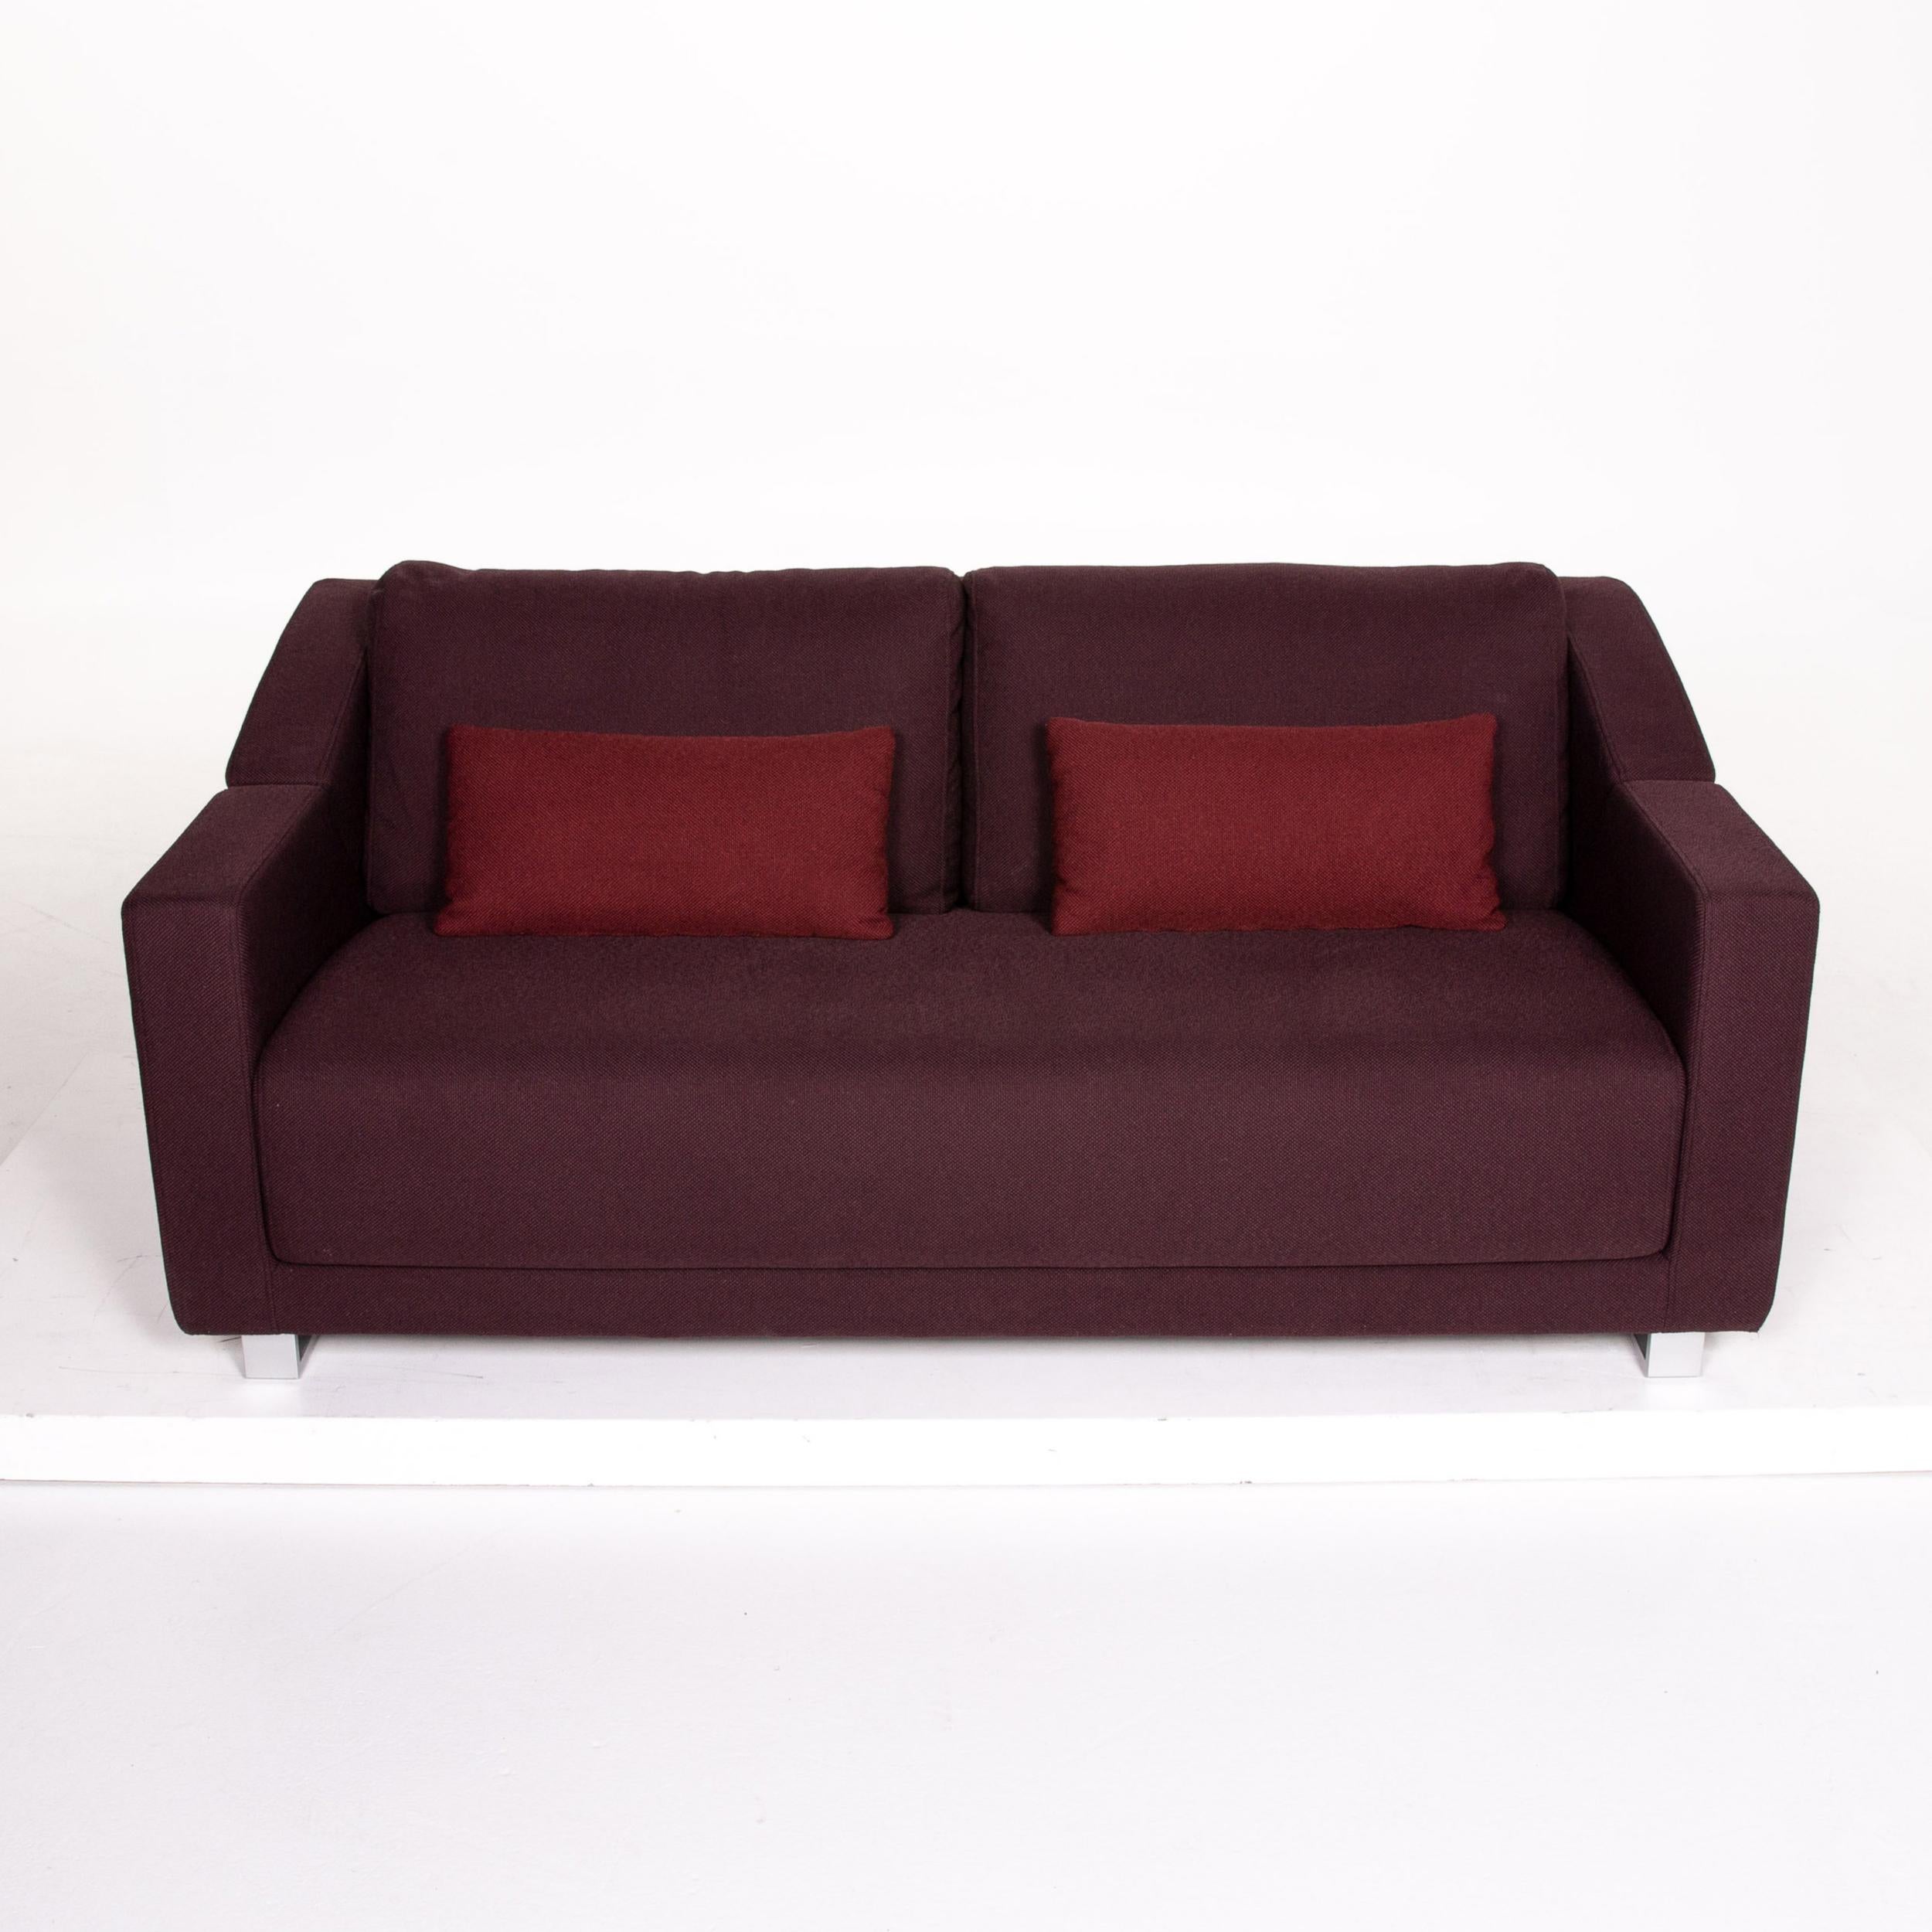 German Rolf Benz 350 Fabric Sofa Aubergine Violet Three-Seat Couch For Sale